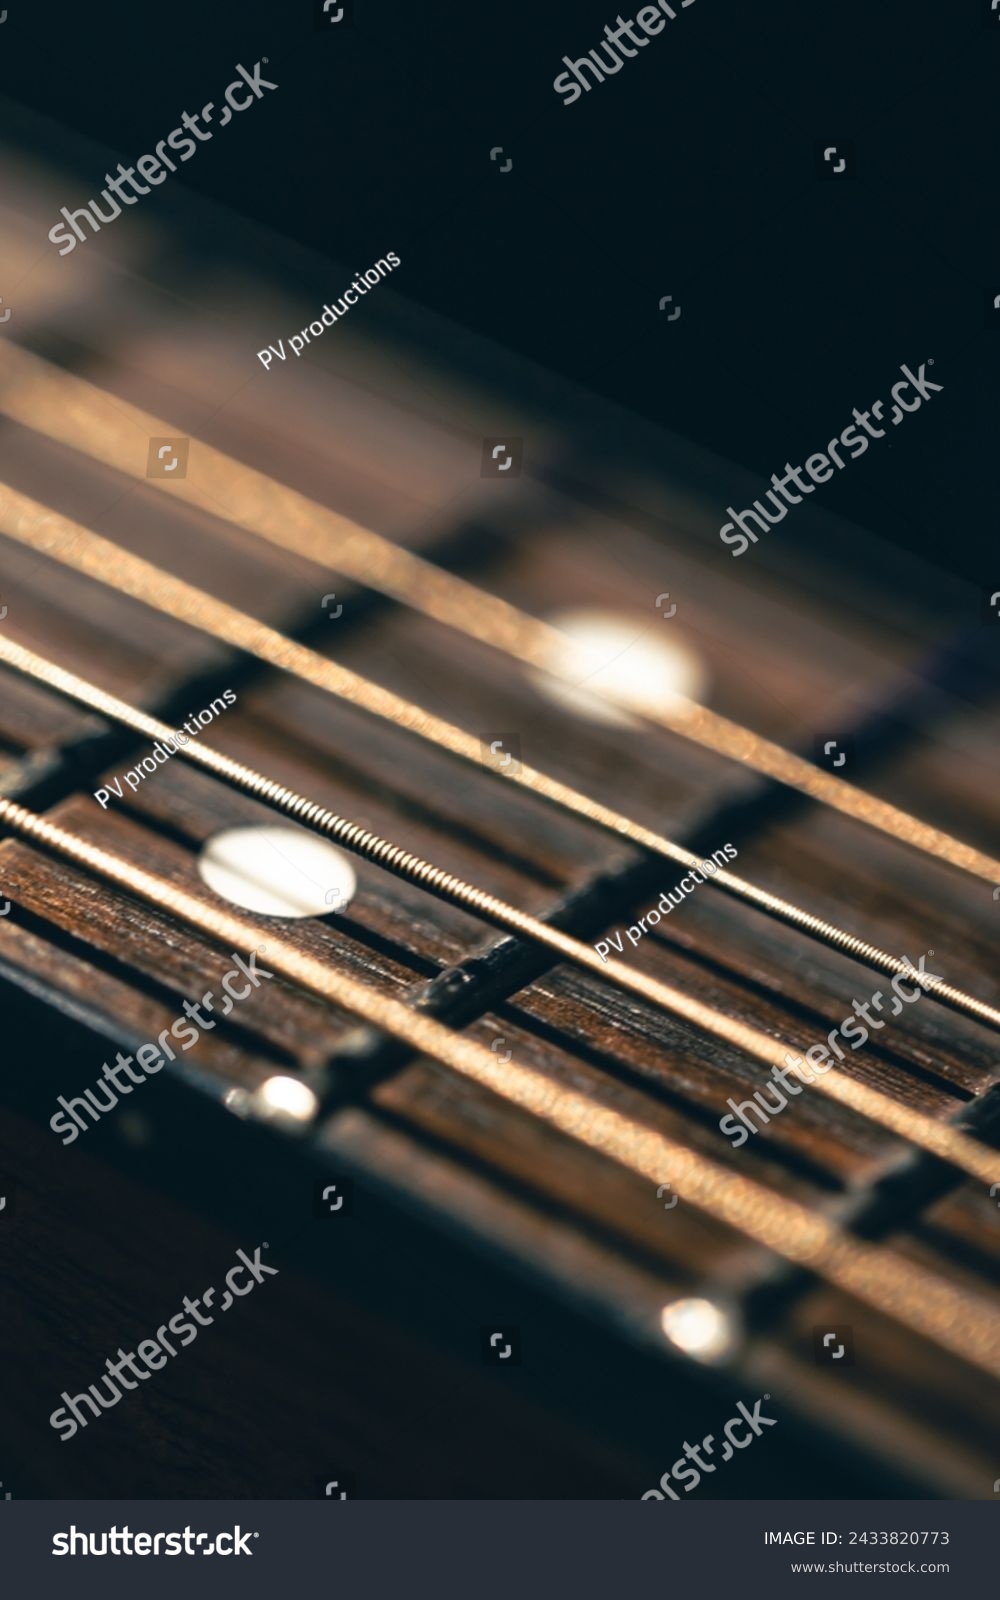 Part of an acoustic guitar, guitar fretboard on a black background. #2433820773